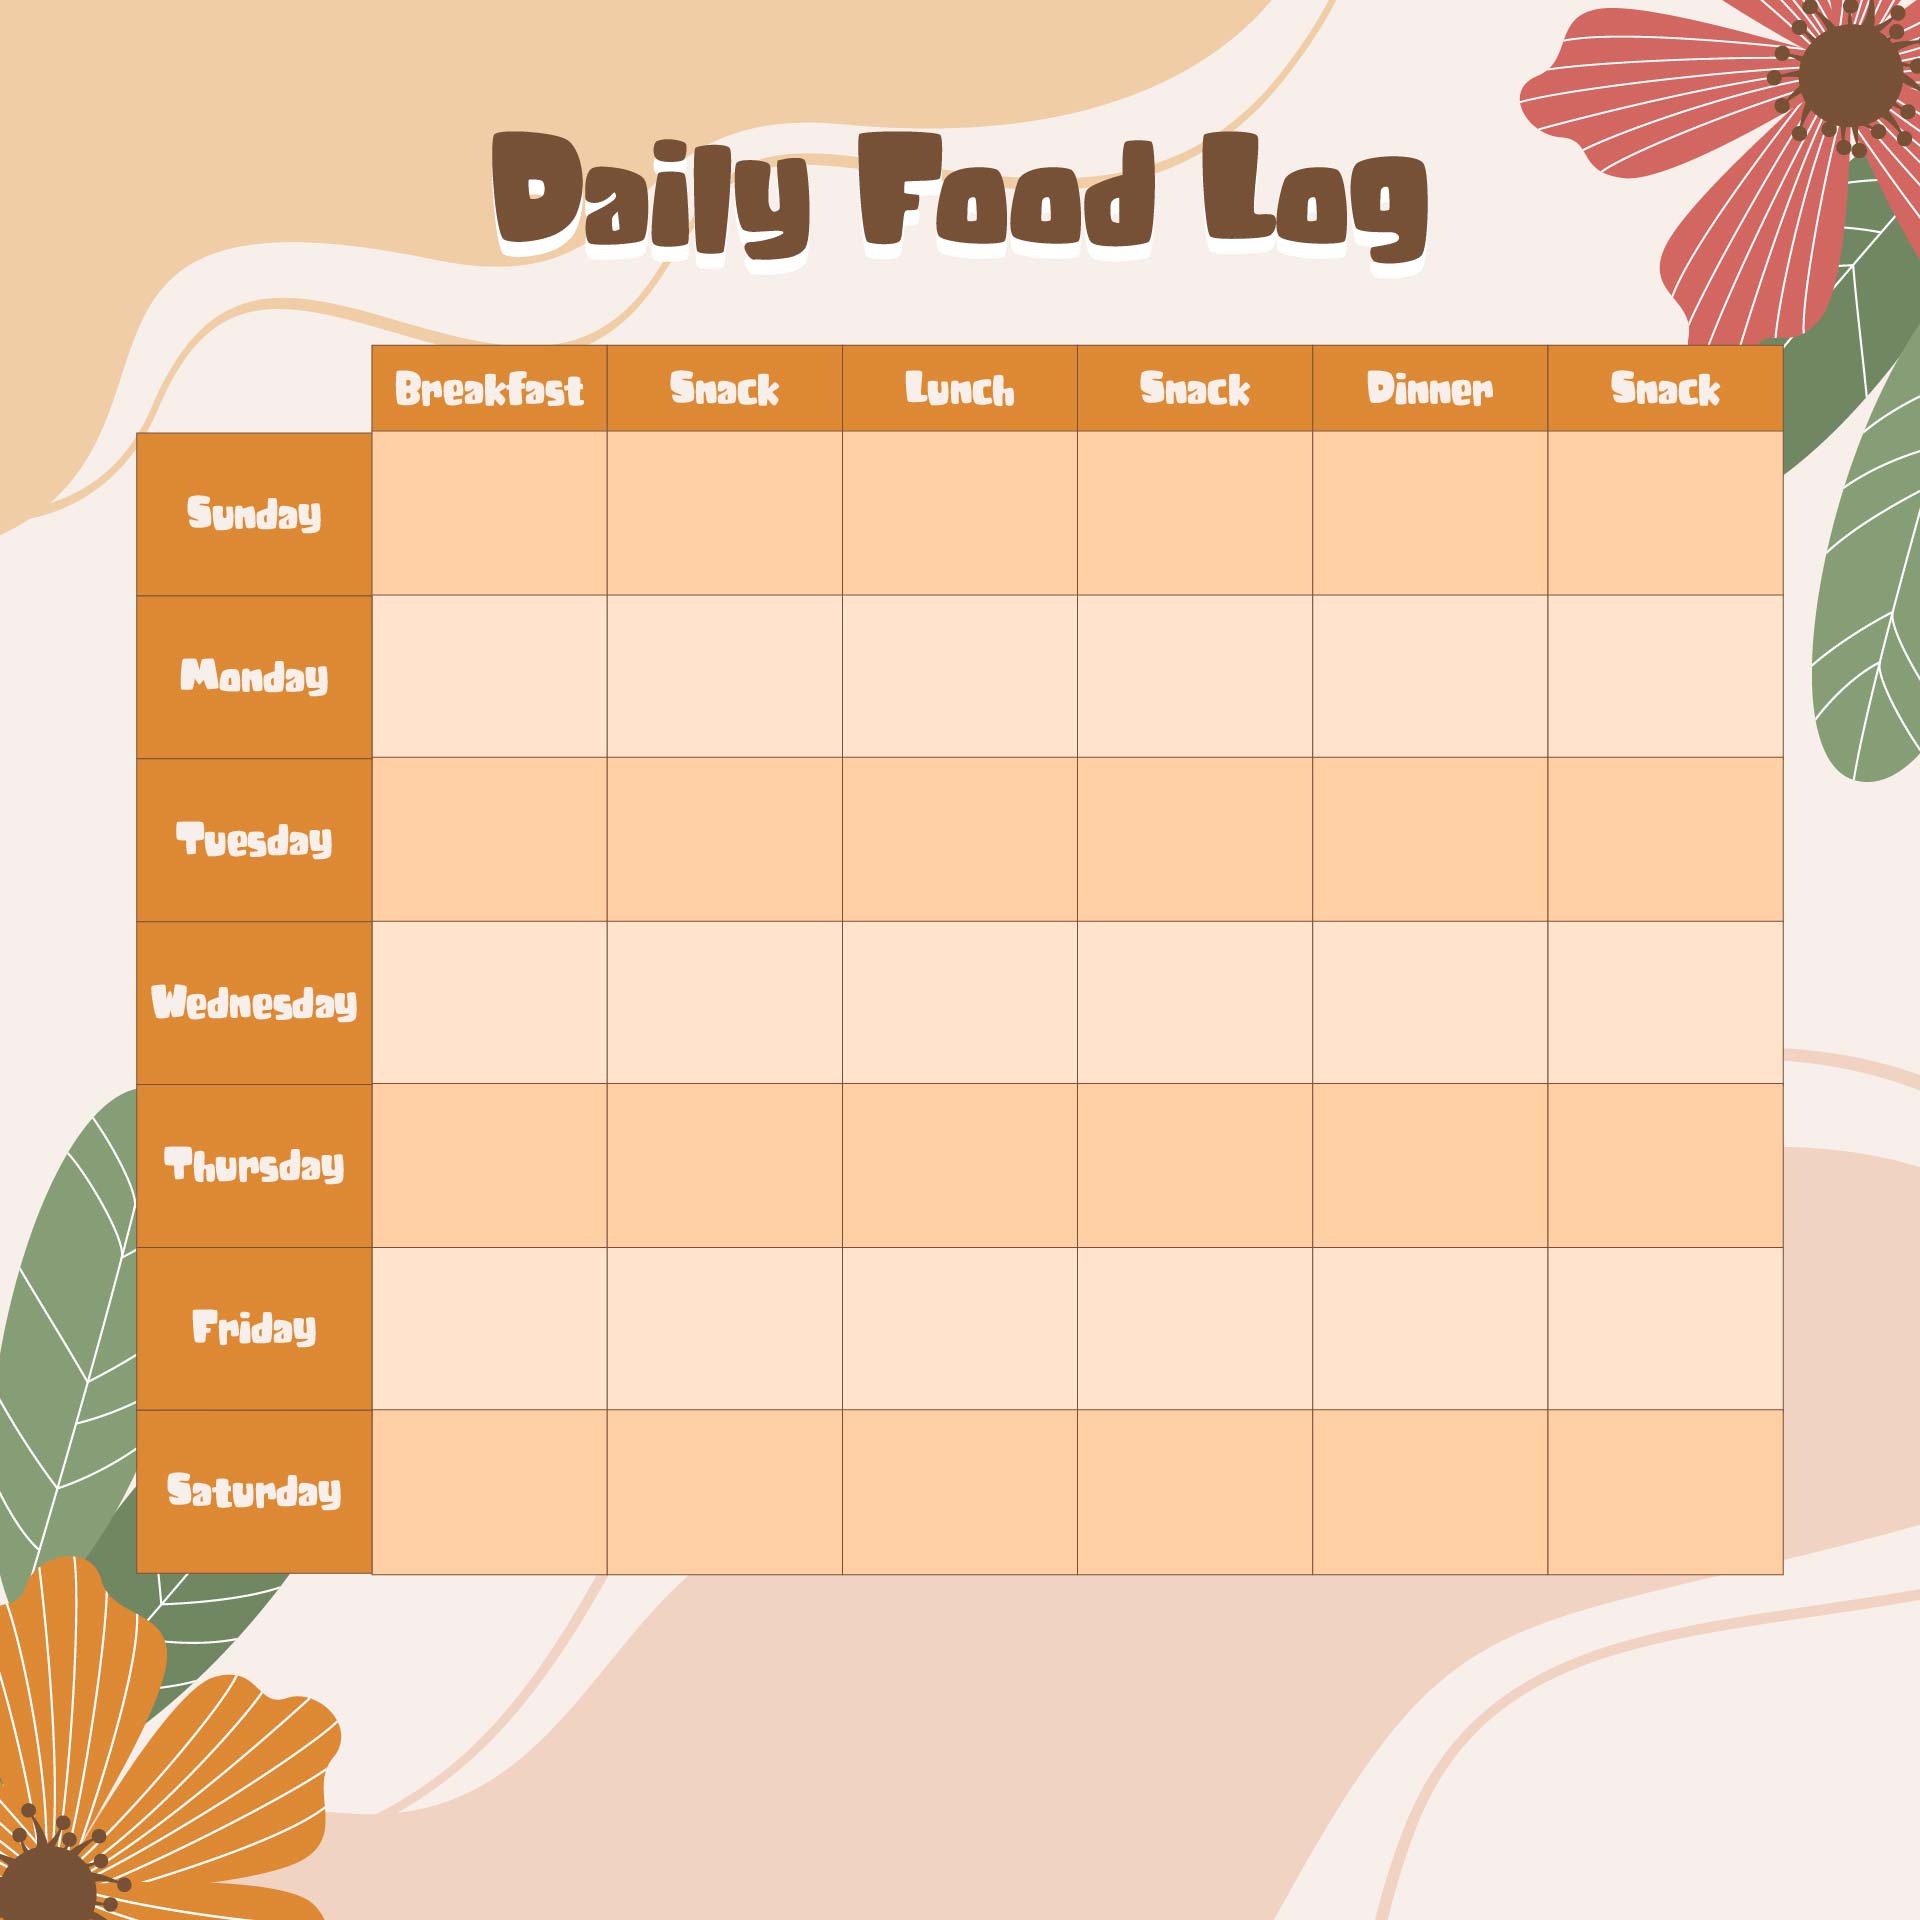 7 Best Images Of Free Printable Weight Loss Logs Free Printable Daily Food Log Weight Loss 